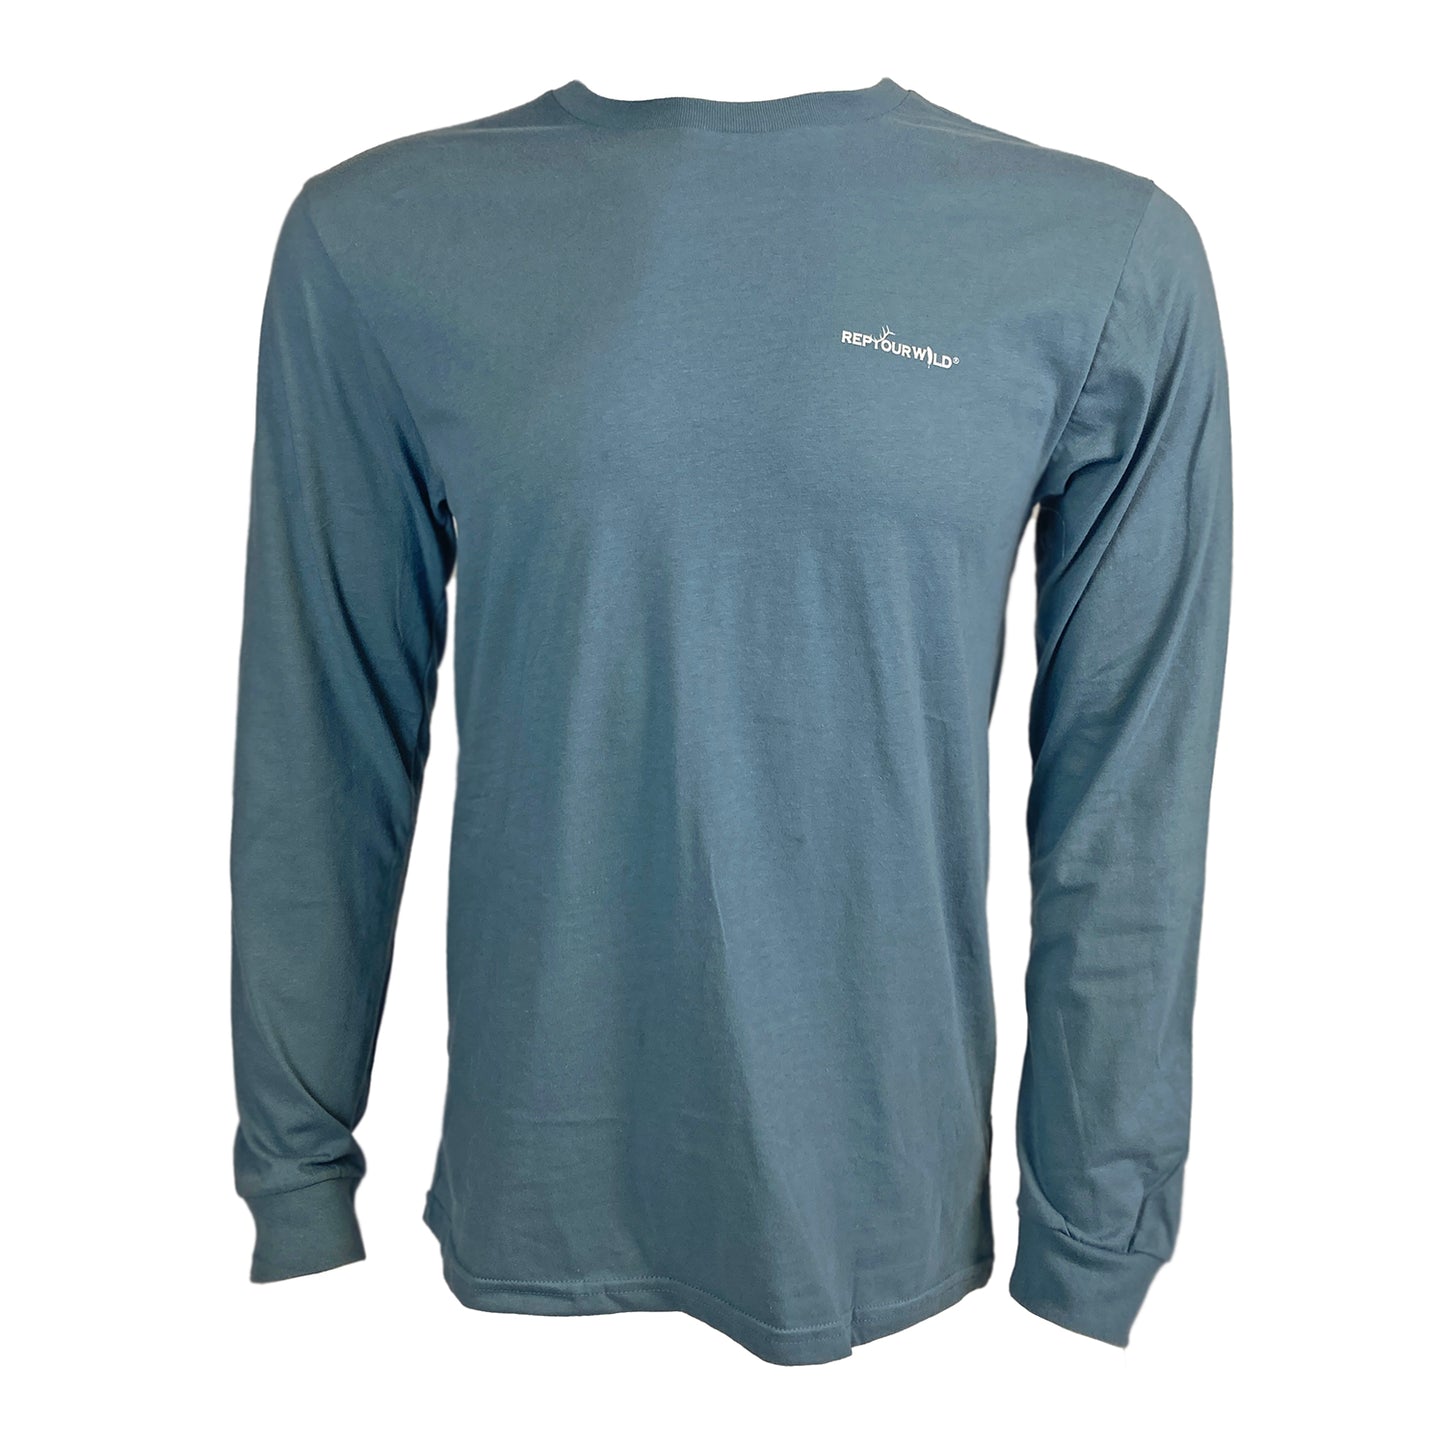 Blue Gray long sleeved tee shown from the front with Rep Your Wild logo on wearer's left chest.